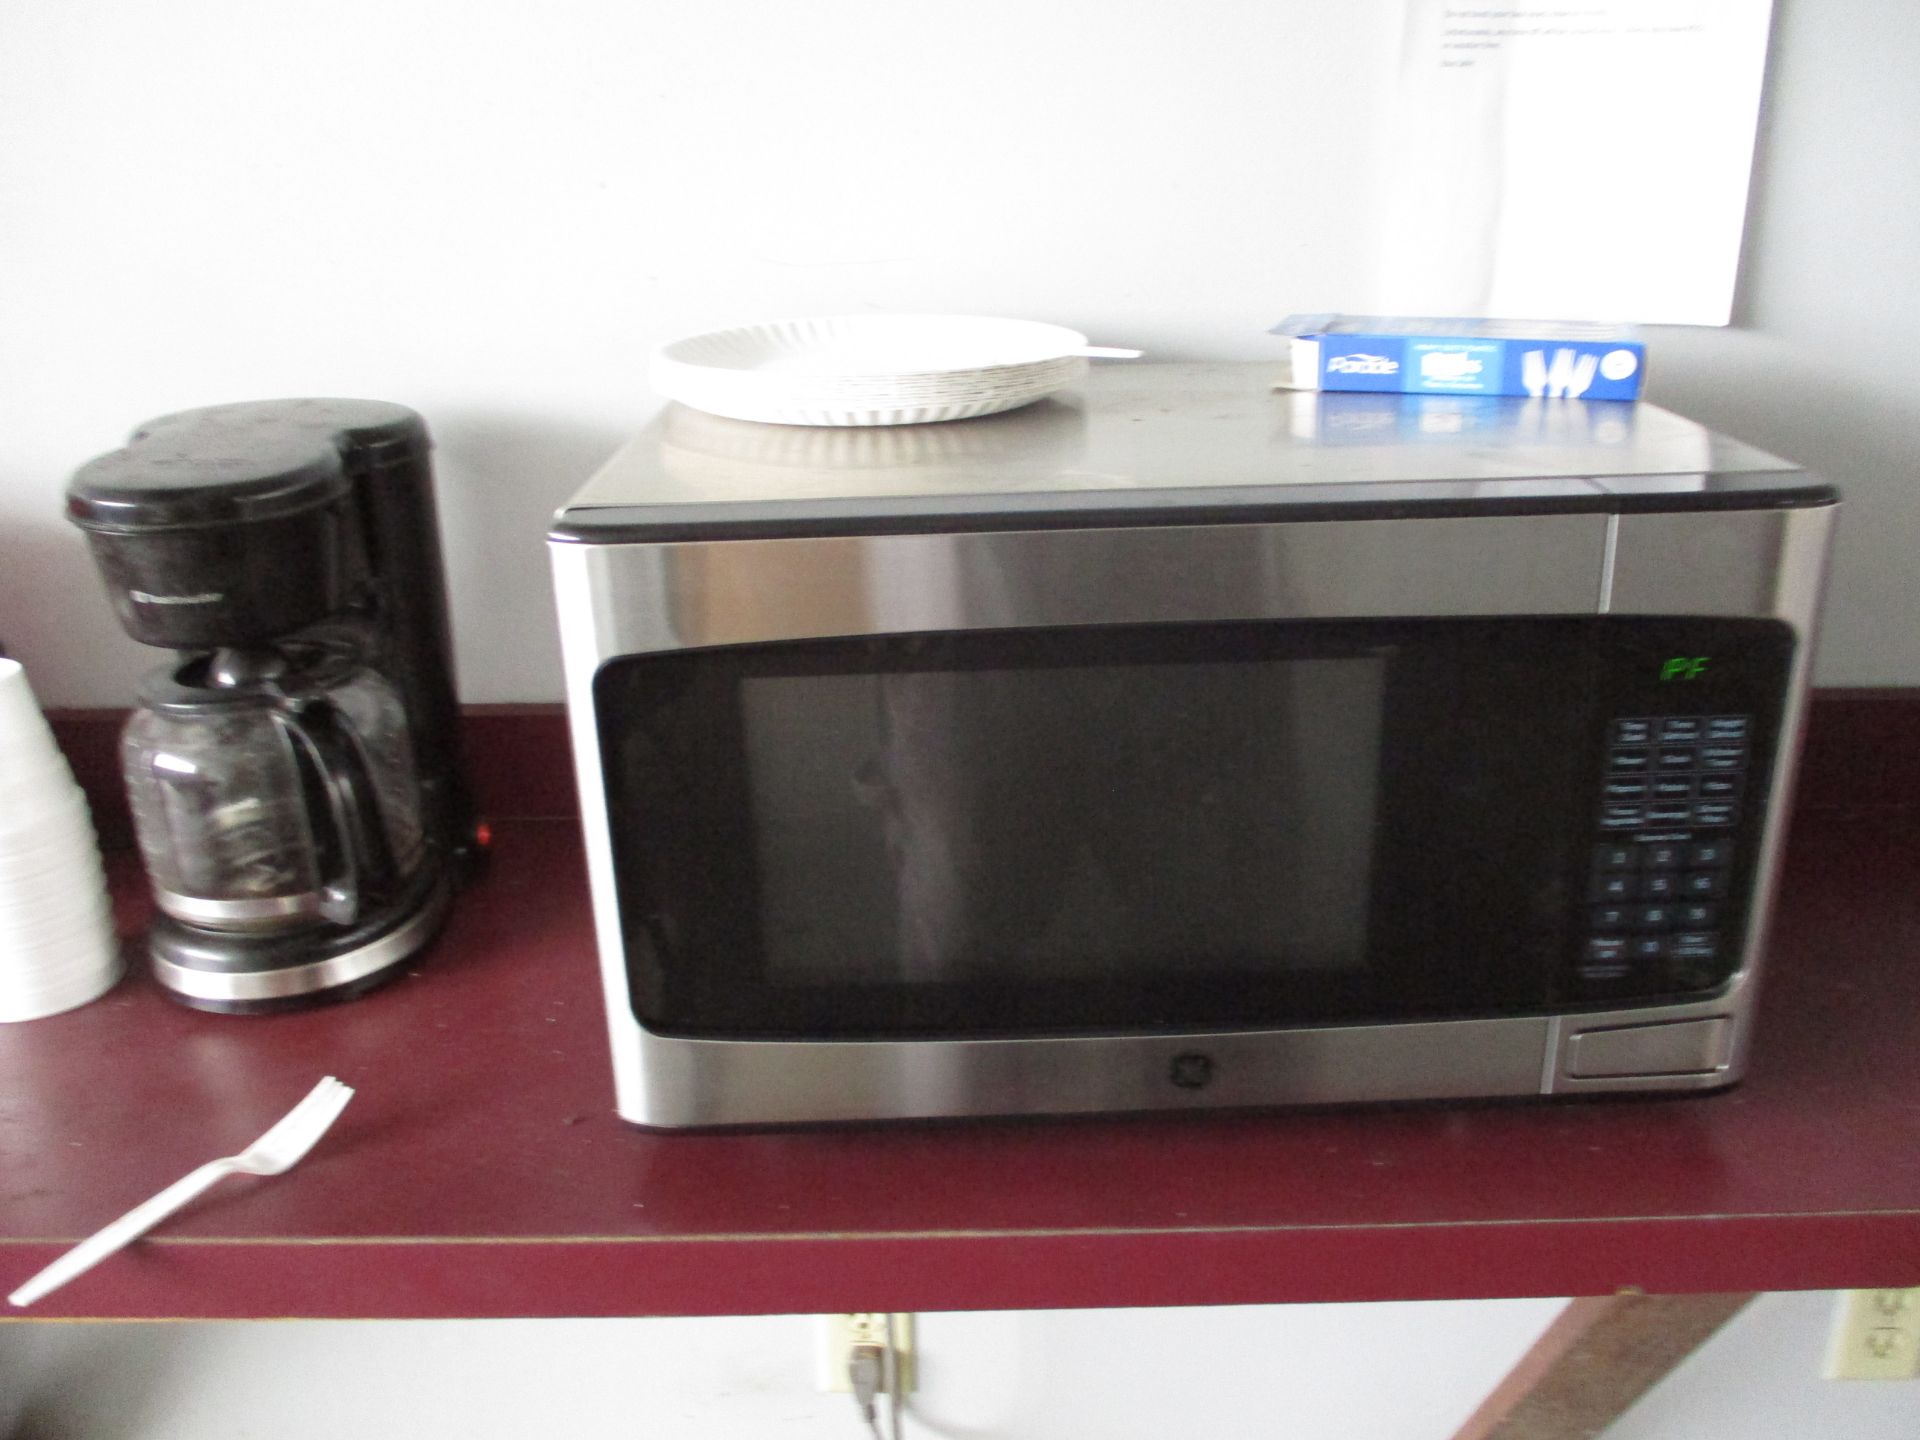 Contents of Lunch Room, Including Table, Chairs, Refrigerator, Coffee Maker, Microwave, and Time - Image 2 of 3